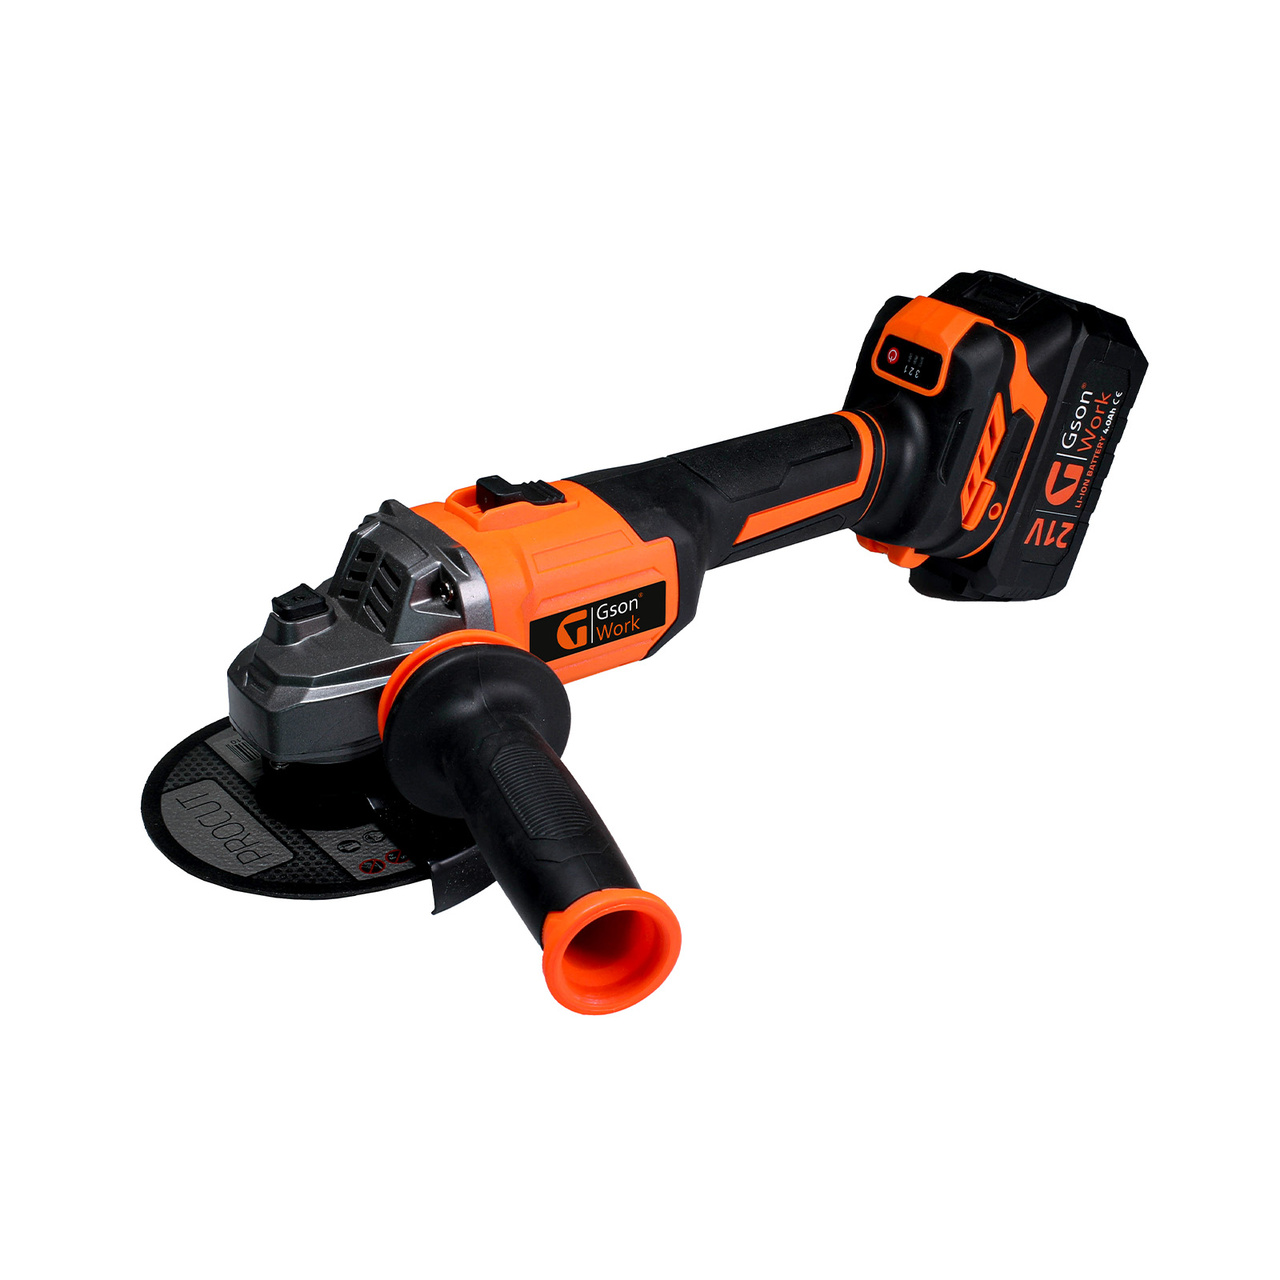 Cordless Angle Grinder 800W